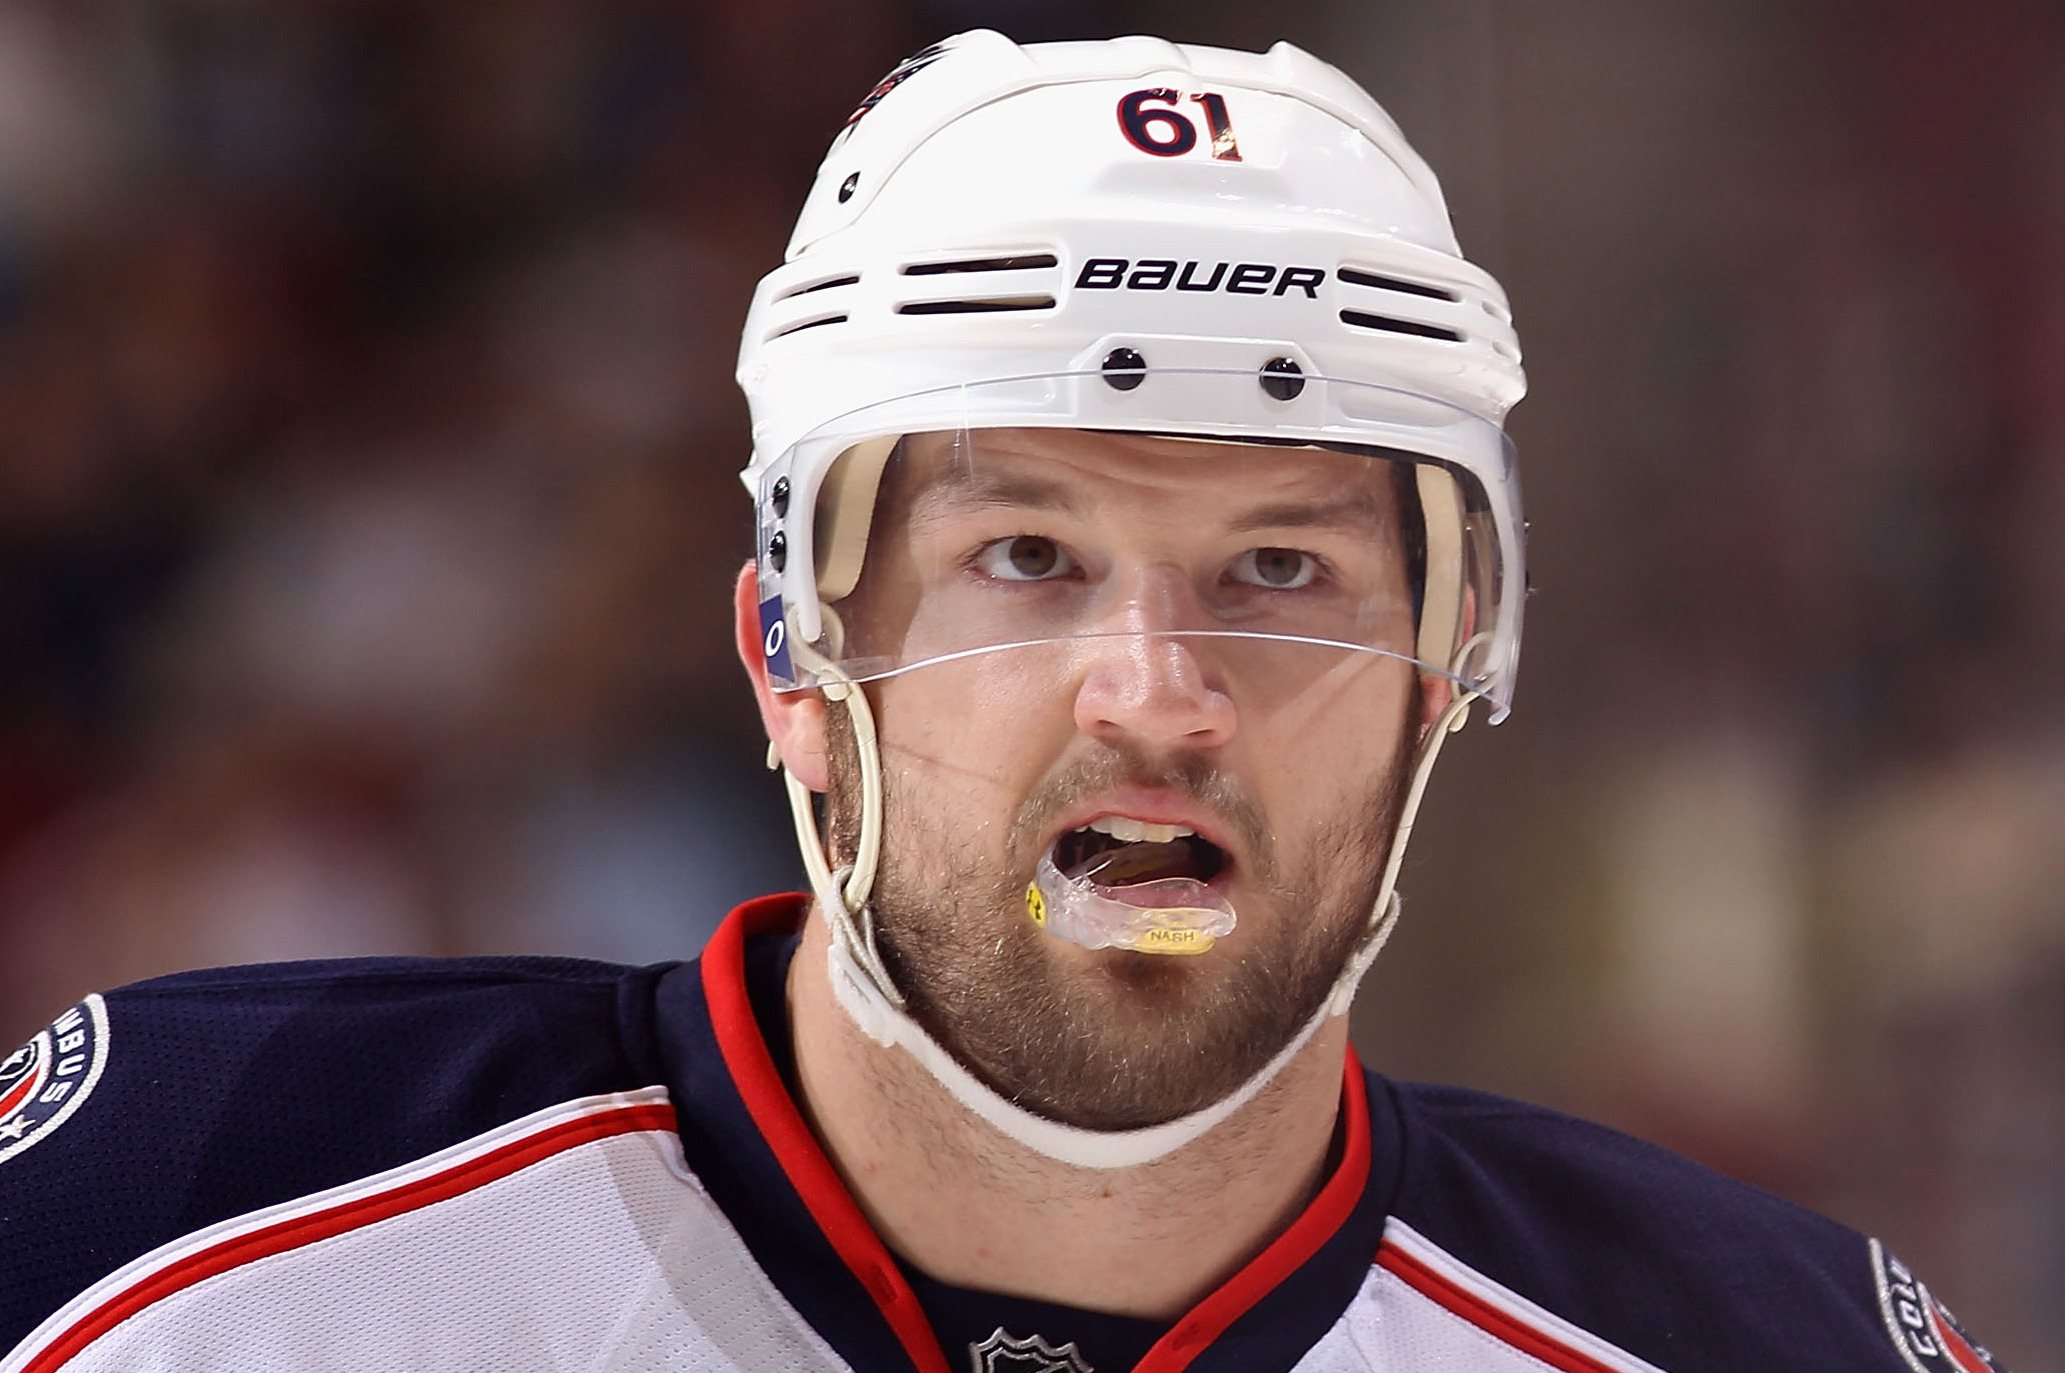 Signs point to Rick Nash making a difference with Rangers - Newsday